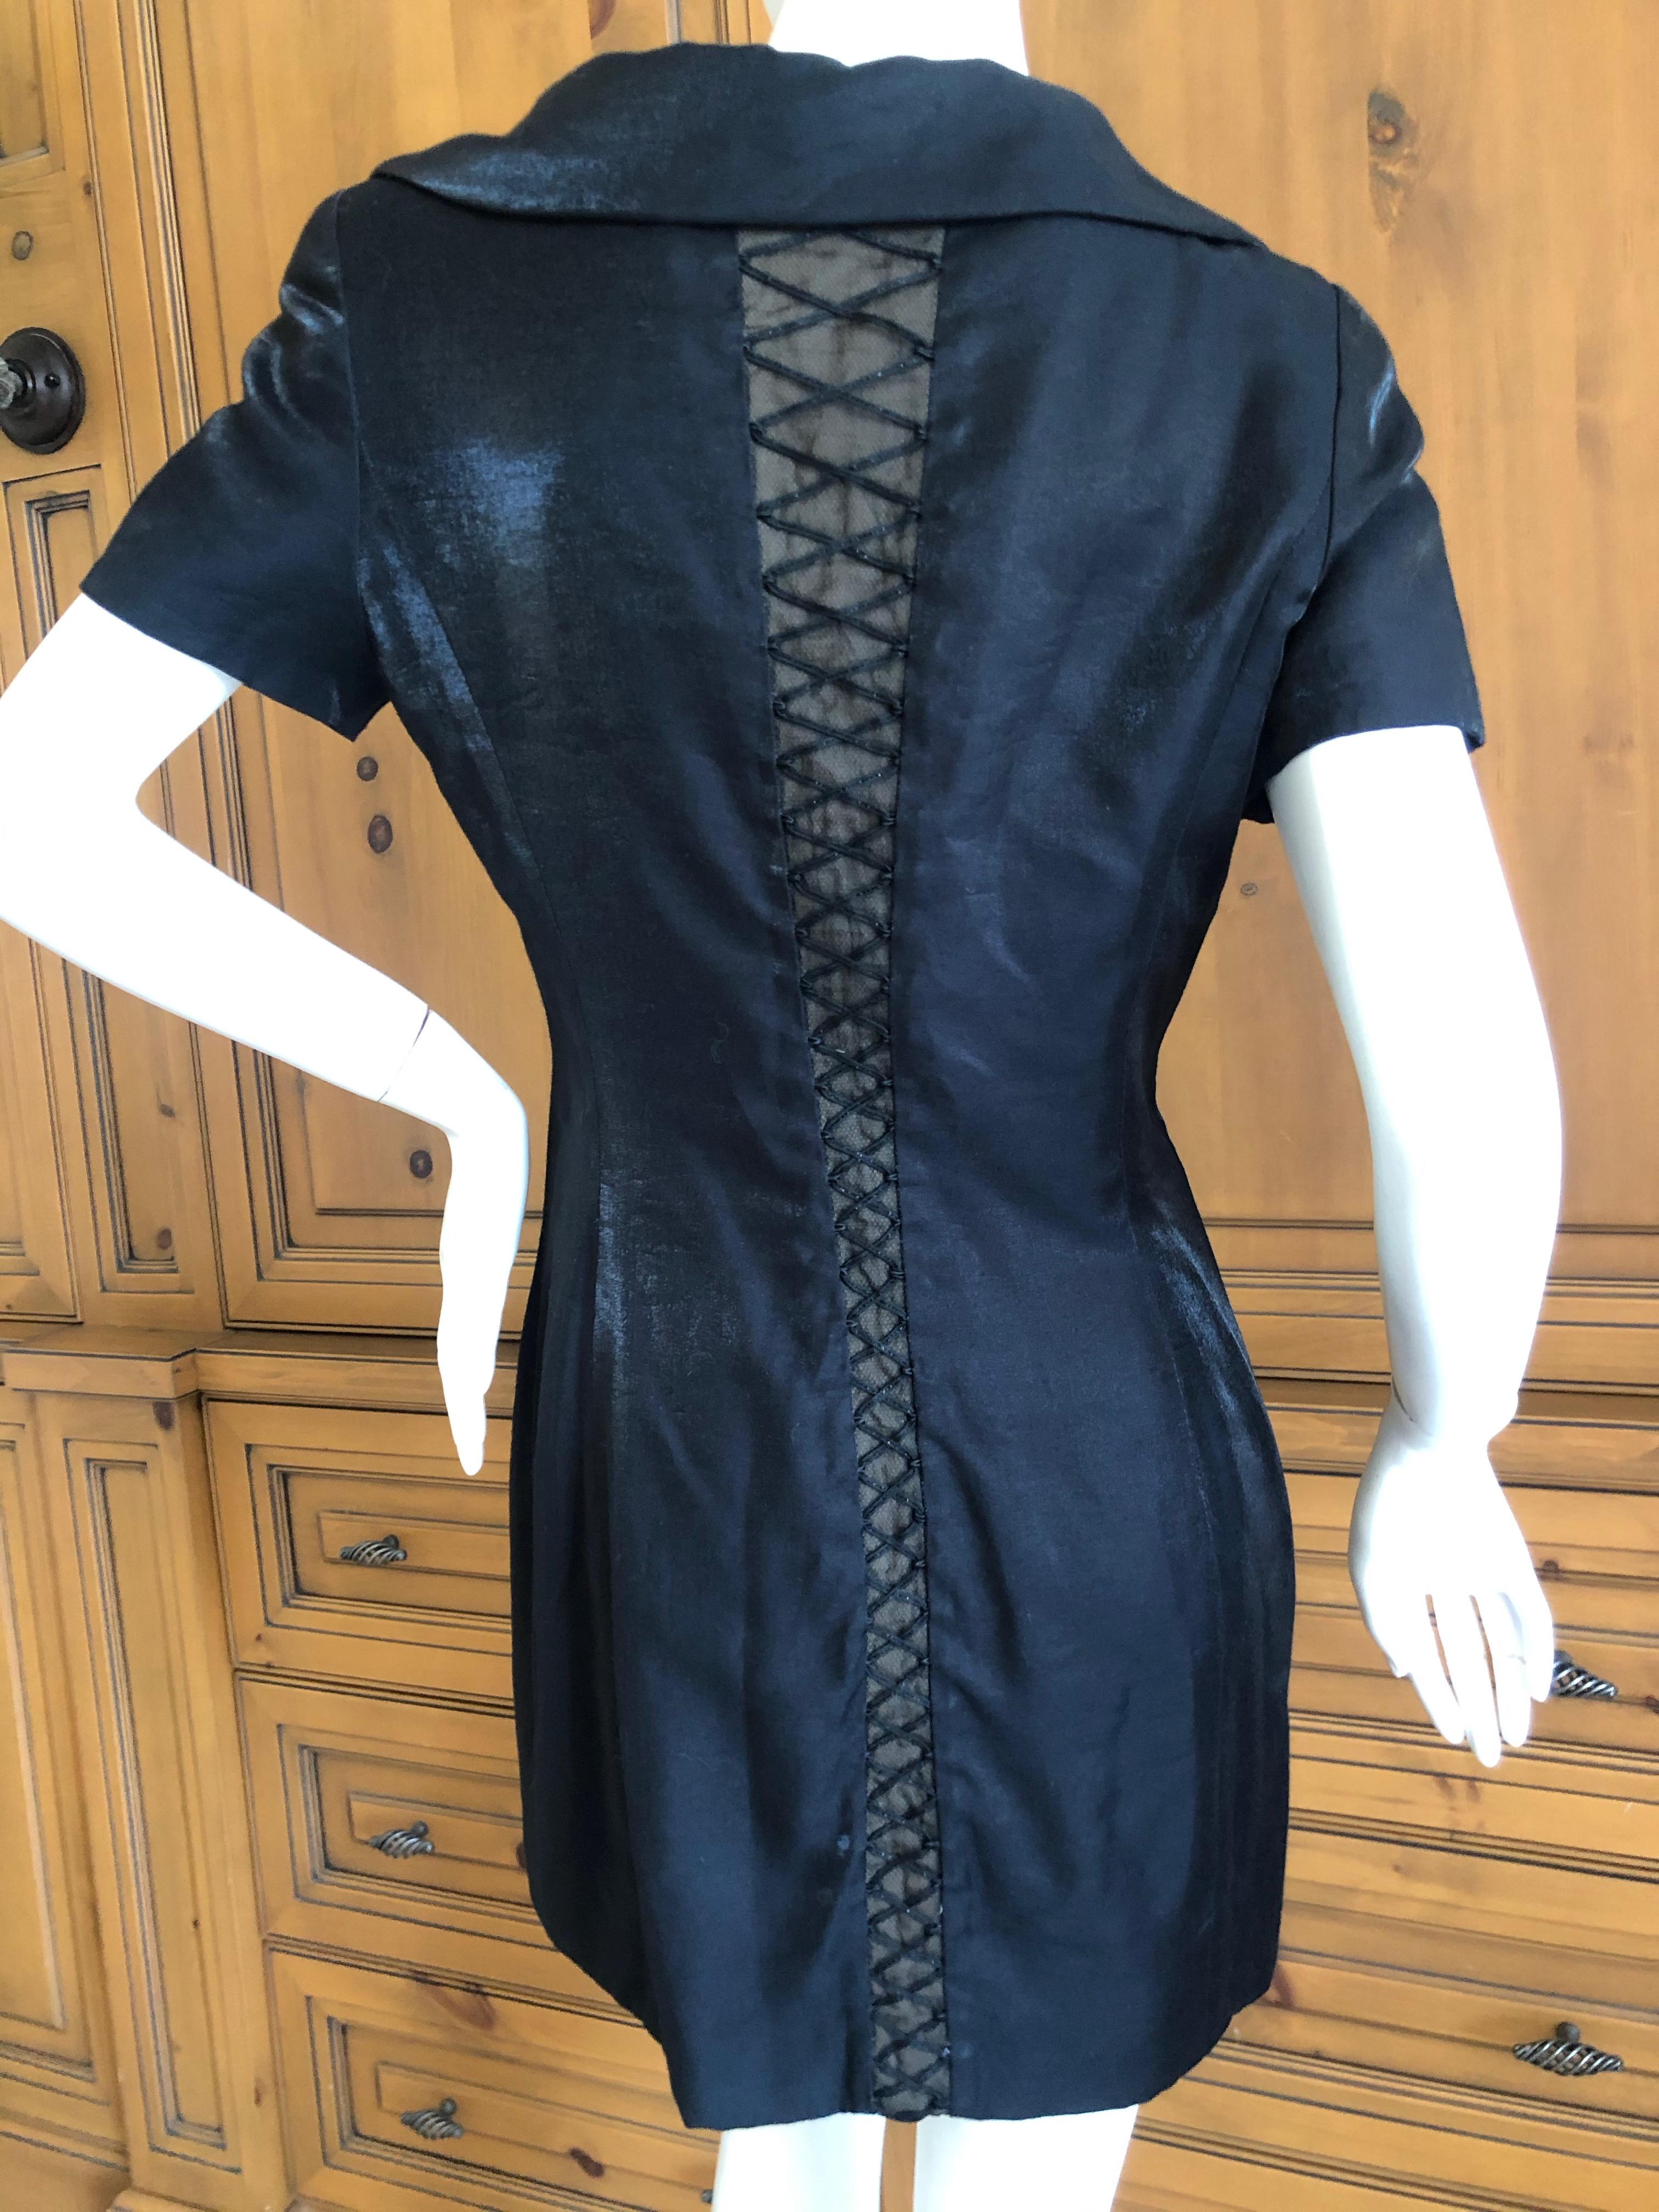 Christian Dior 1992 Numbered Demi Couture Corset Laced Dress by Gianfranco Ferre For Sale 4